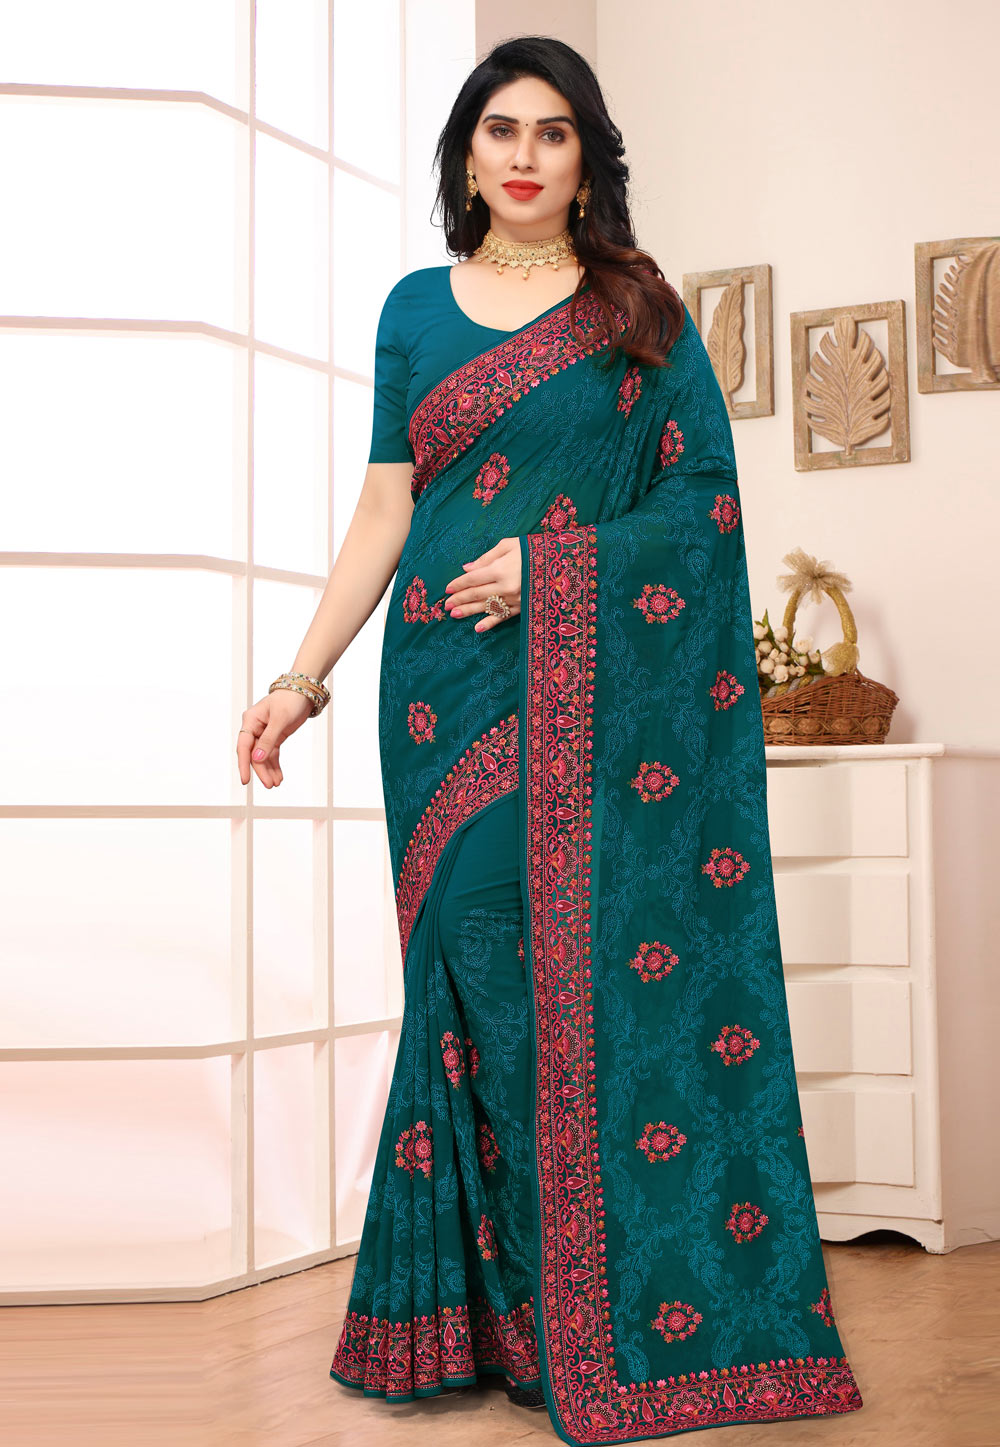 Teal Georgette Saree With Blouse 247044